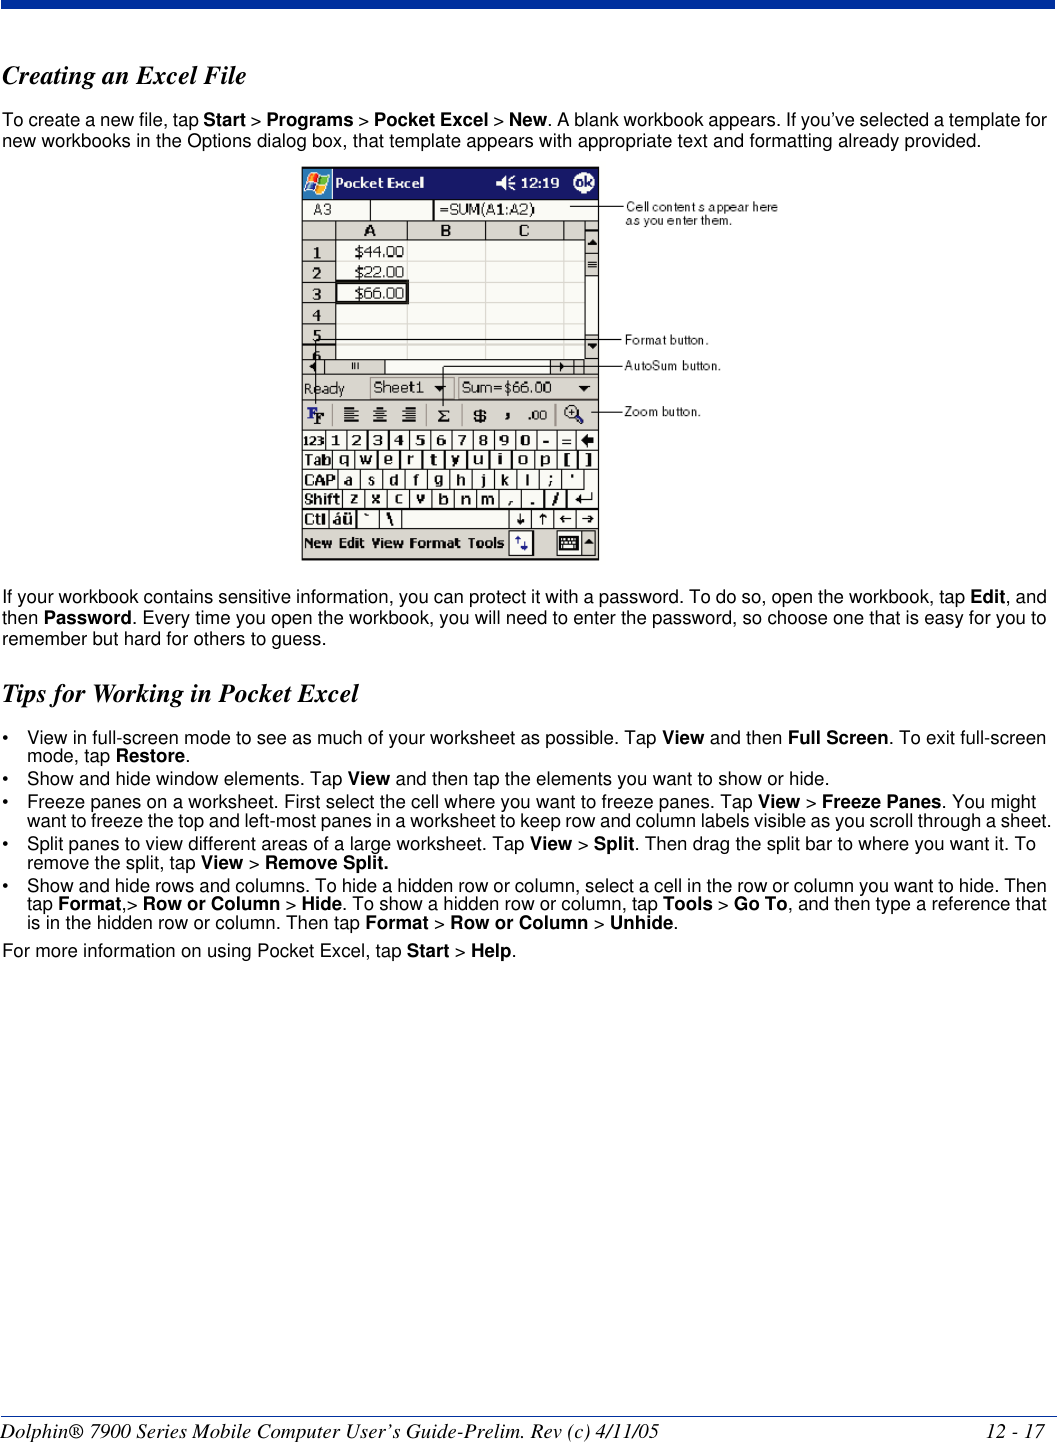 Dolphin® 7900 Series Mobile Computer User’s Guide-Prelim. Rev (c) 4/11/05 12 - 17Creating an Excel FileTo create a new file, tap Start &gt; Programs &gt; Pocket Excel &gt; New. A blank workbook appears. If you’ve selected a template for new workbooks in the Options dialog box, that template appears with appropriate text and formatting already provided. If your workbook contains sensitive information, you can protect it with a password. To do so, open the workbook, tap Edit, and then Password. Every time you open the workbook, you will need to enter the password, so choose one that is easy for you to remember but hard for others to guess.Tips for Working in Pocket Excel• View in full-screen mode to see as much of your worksheet as possible. Tap View and then Full Screen. To exit full-screen mode, tap Restore.• Show and hide window elements. Tap View and then tap the elements you want to show or hide.• Freeze panes on a worksheet. First select the cell where you want to freeze panes. Tap View &gt; Freeze Panes. You might want to freeze the top and left-most panes in a worksheet to keep row and column labels visible as you scroll through a sheet.• Split panes to view different areas of a large worksheet. Tap View &gt; Split. Then drag the split bar to where you want it. To remove the split, tap View &gt; Remove Split.• Show and hide rows and columns. To hide a hidden row or column, select a cell in the row or column you want to hide. Then tap Format,&gt; Row or Column &gt; Hide. To show a hidden row or column, tap Tools &gt; Go To, and then type a reference that is in the hidden row or column. Then tap Format &gt; Row or Column &gt; Unhide.For more information on using Pocket Excel, tap Start &gt; Help.